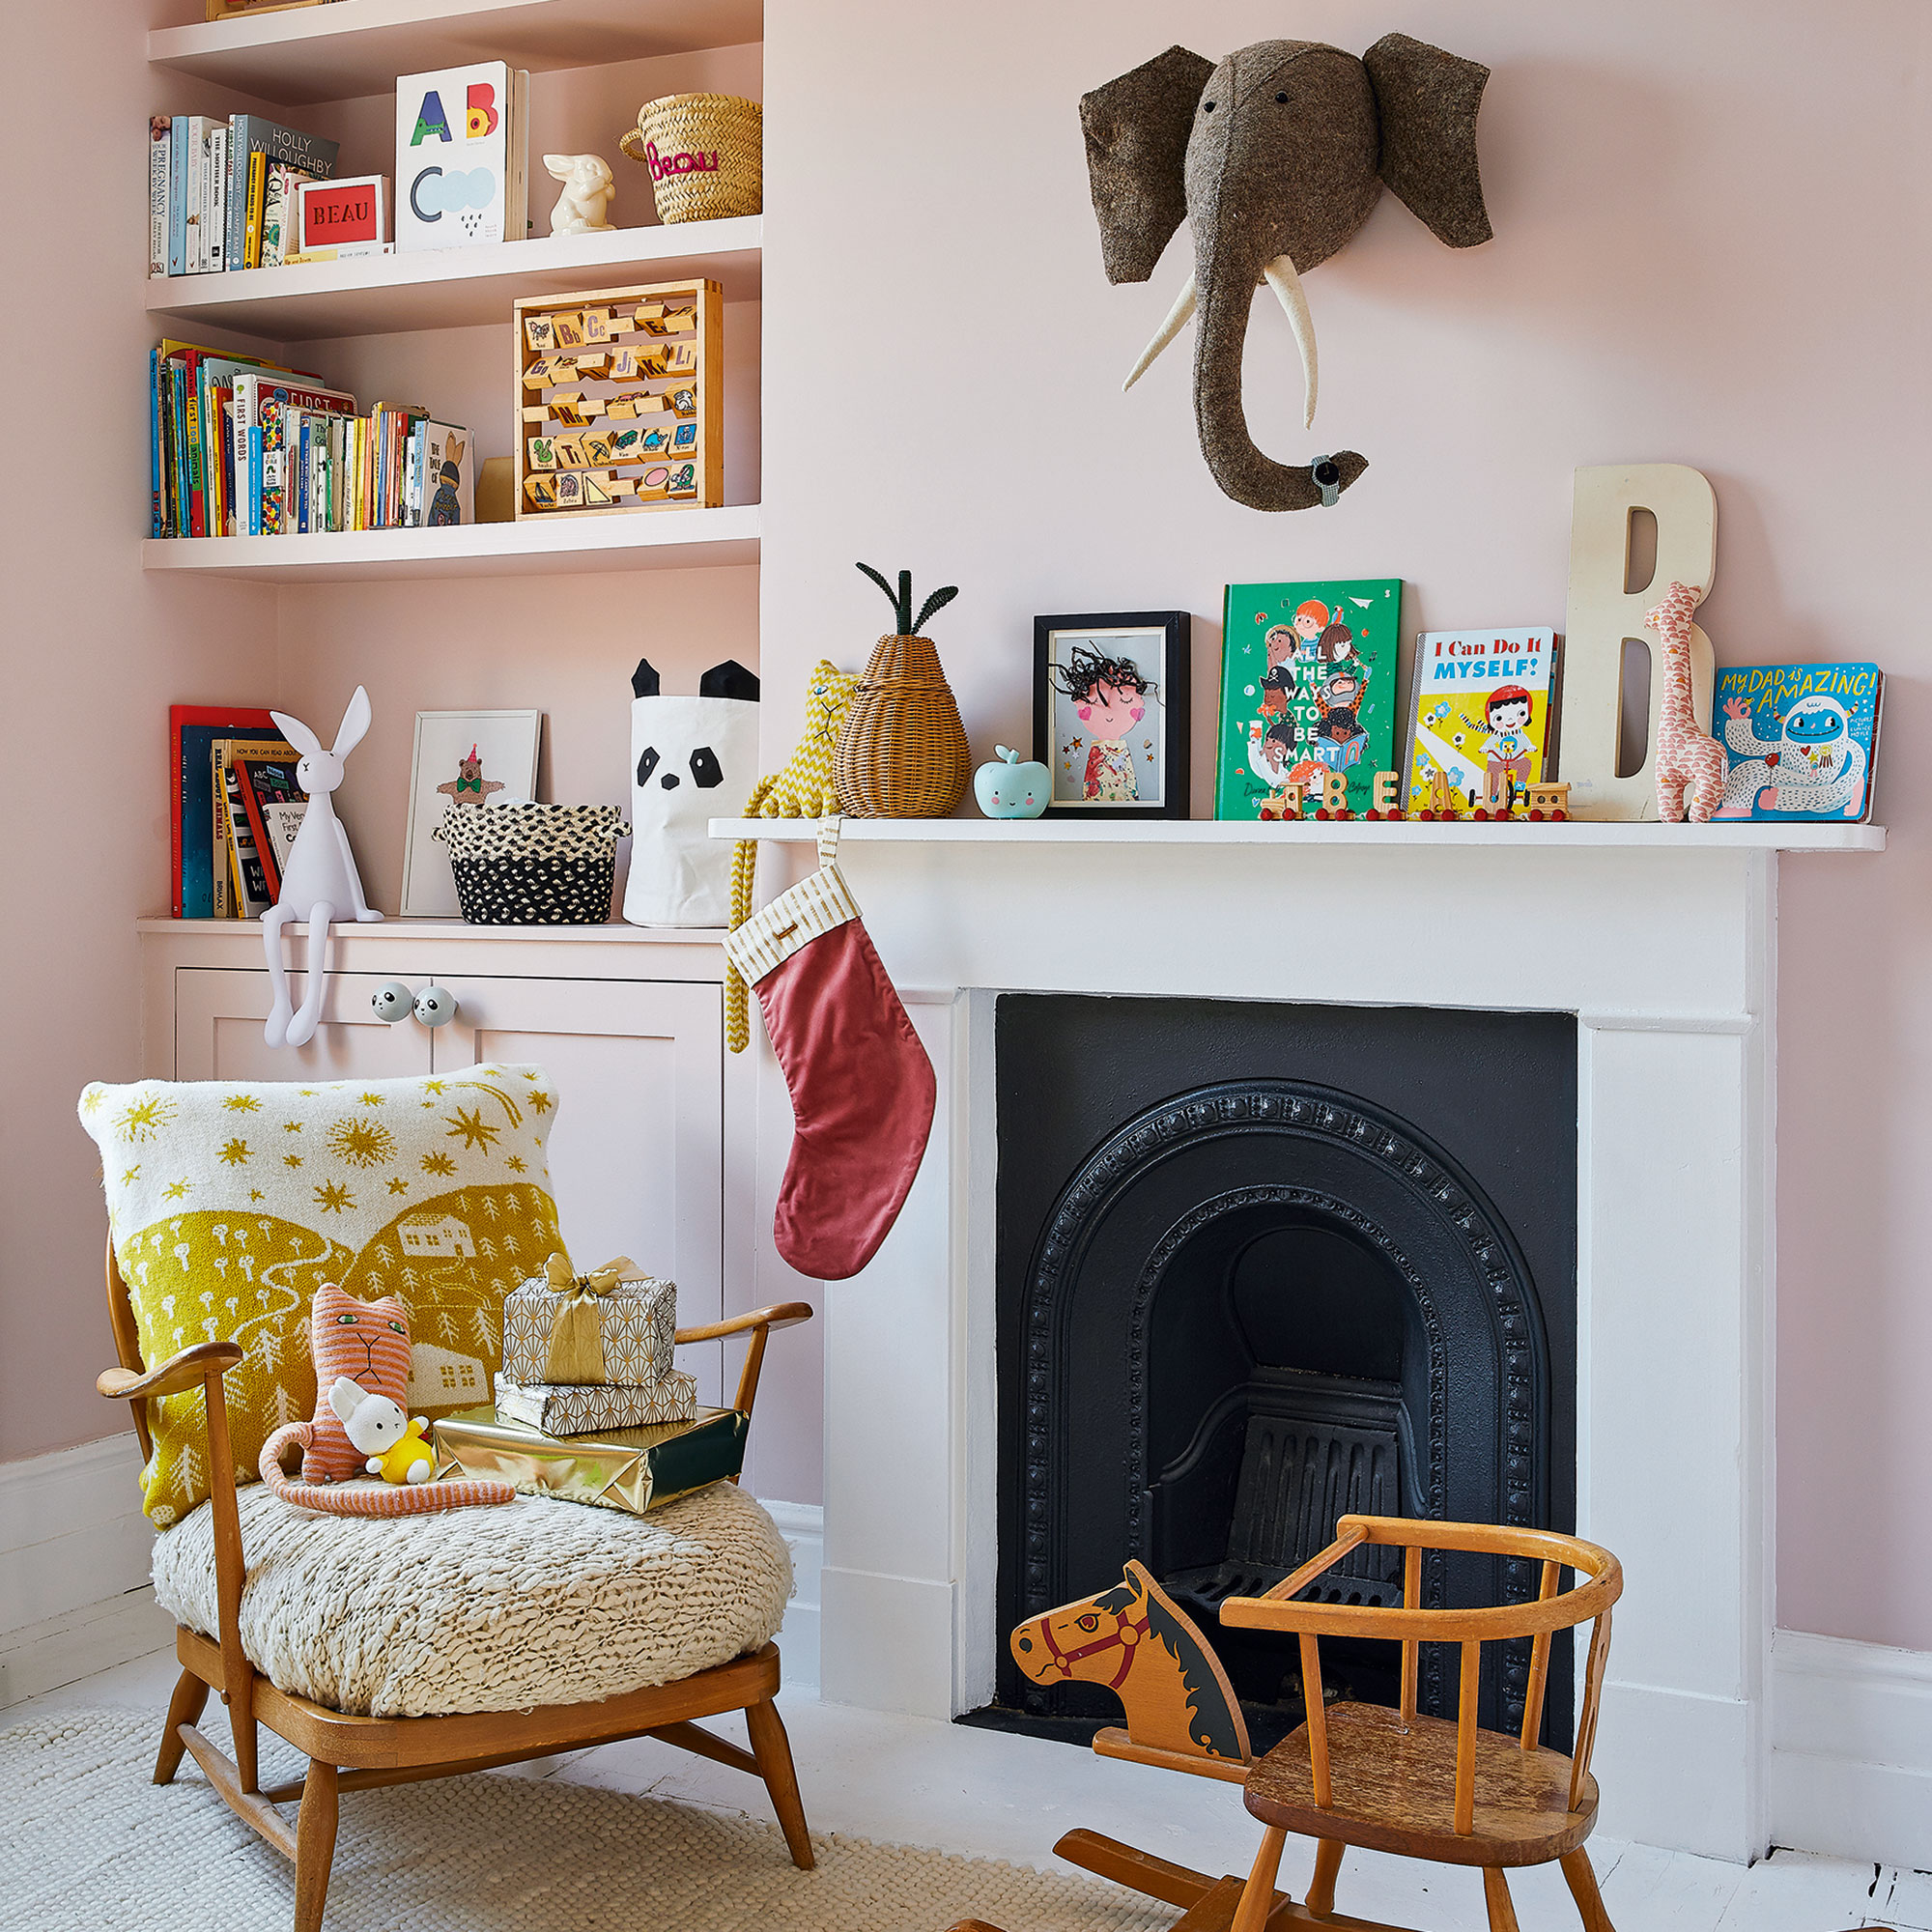 Soft pink painted children's room with white fireplace, and elephant head on wall above